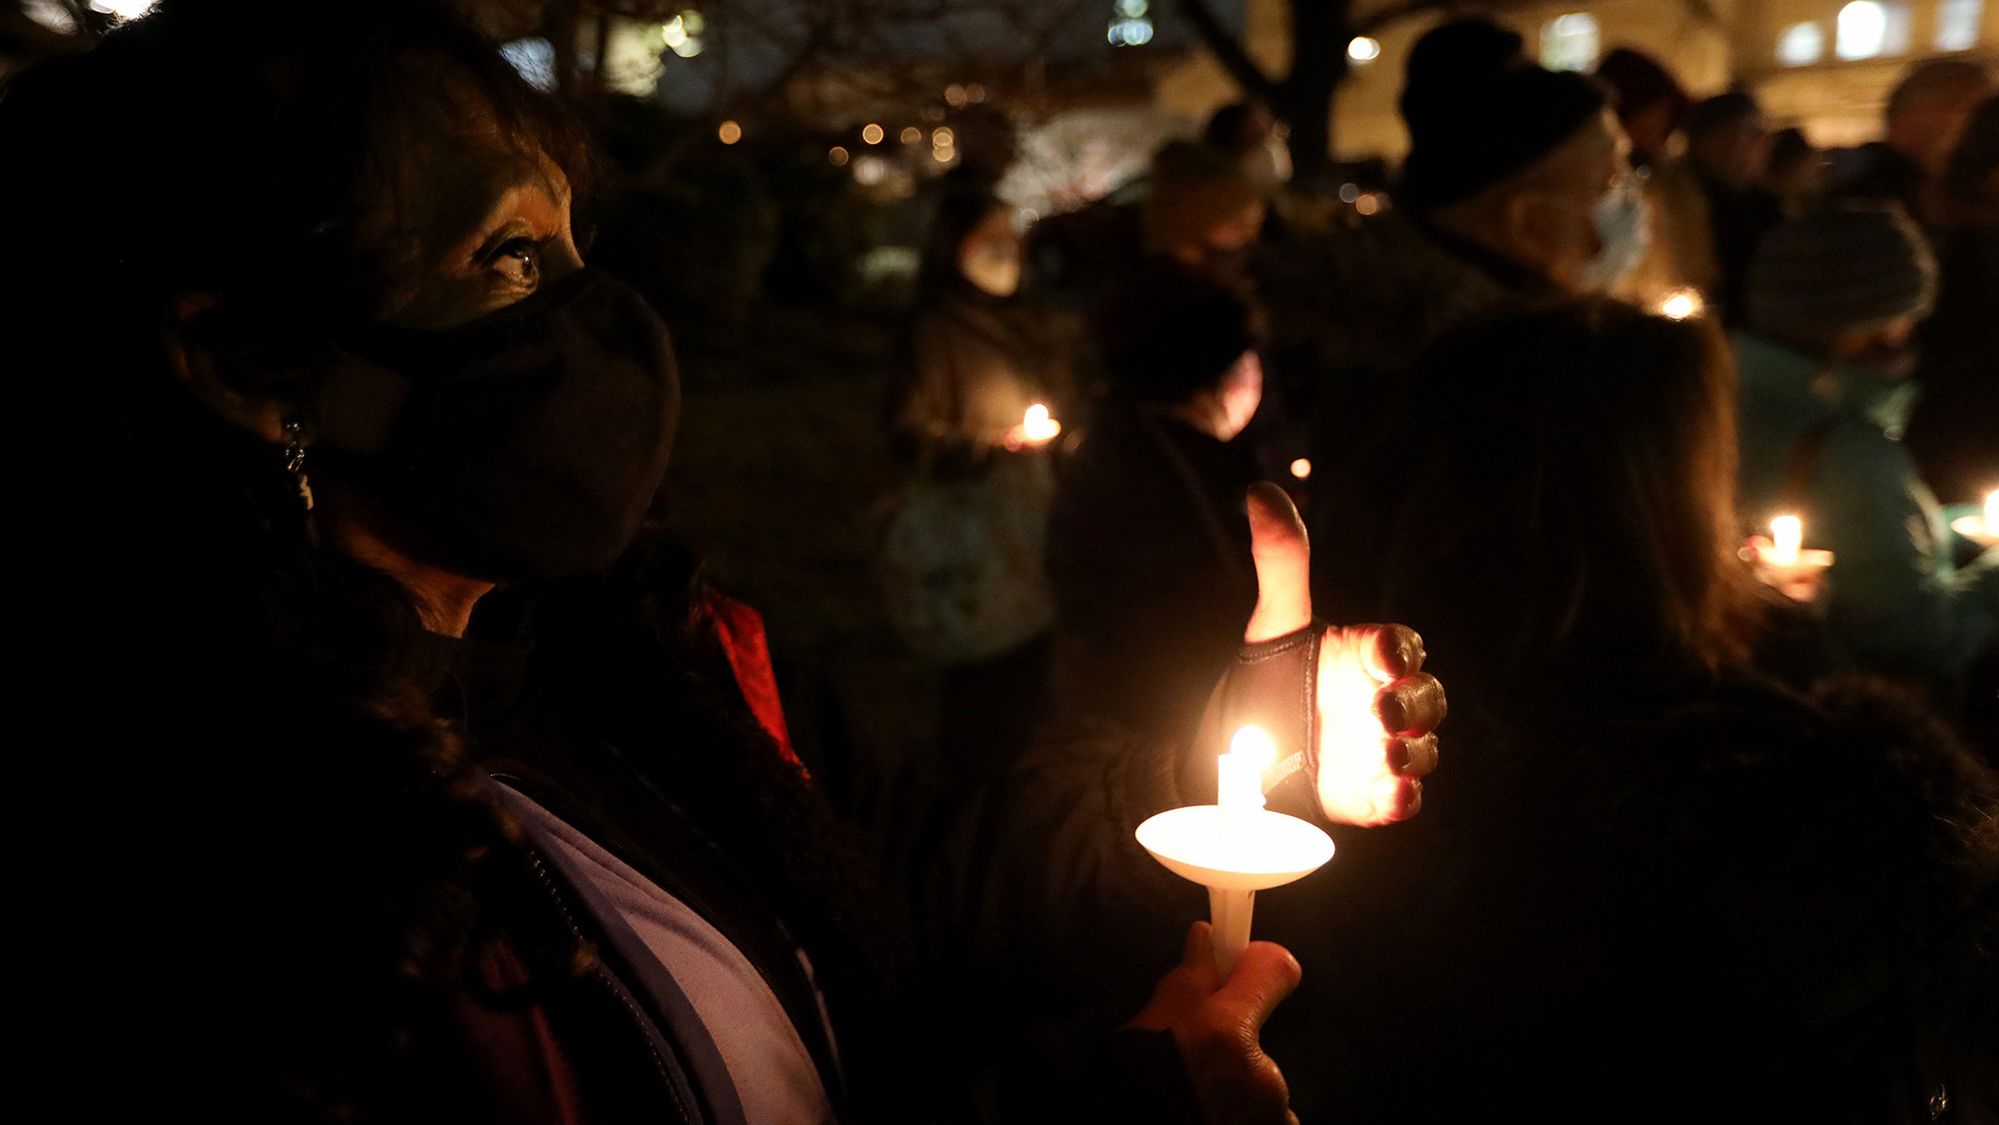 A vigil for Ukraine takes place in Montclair, New Jersey, on February 24.